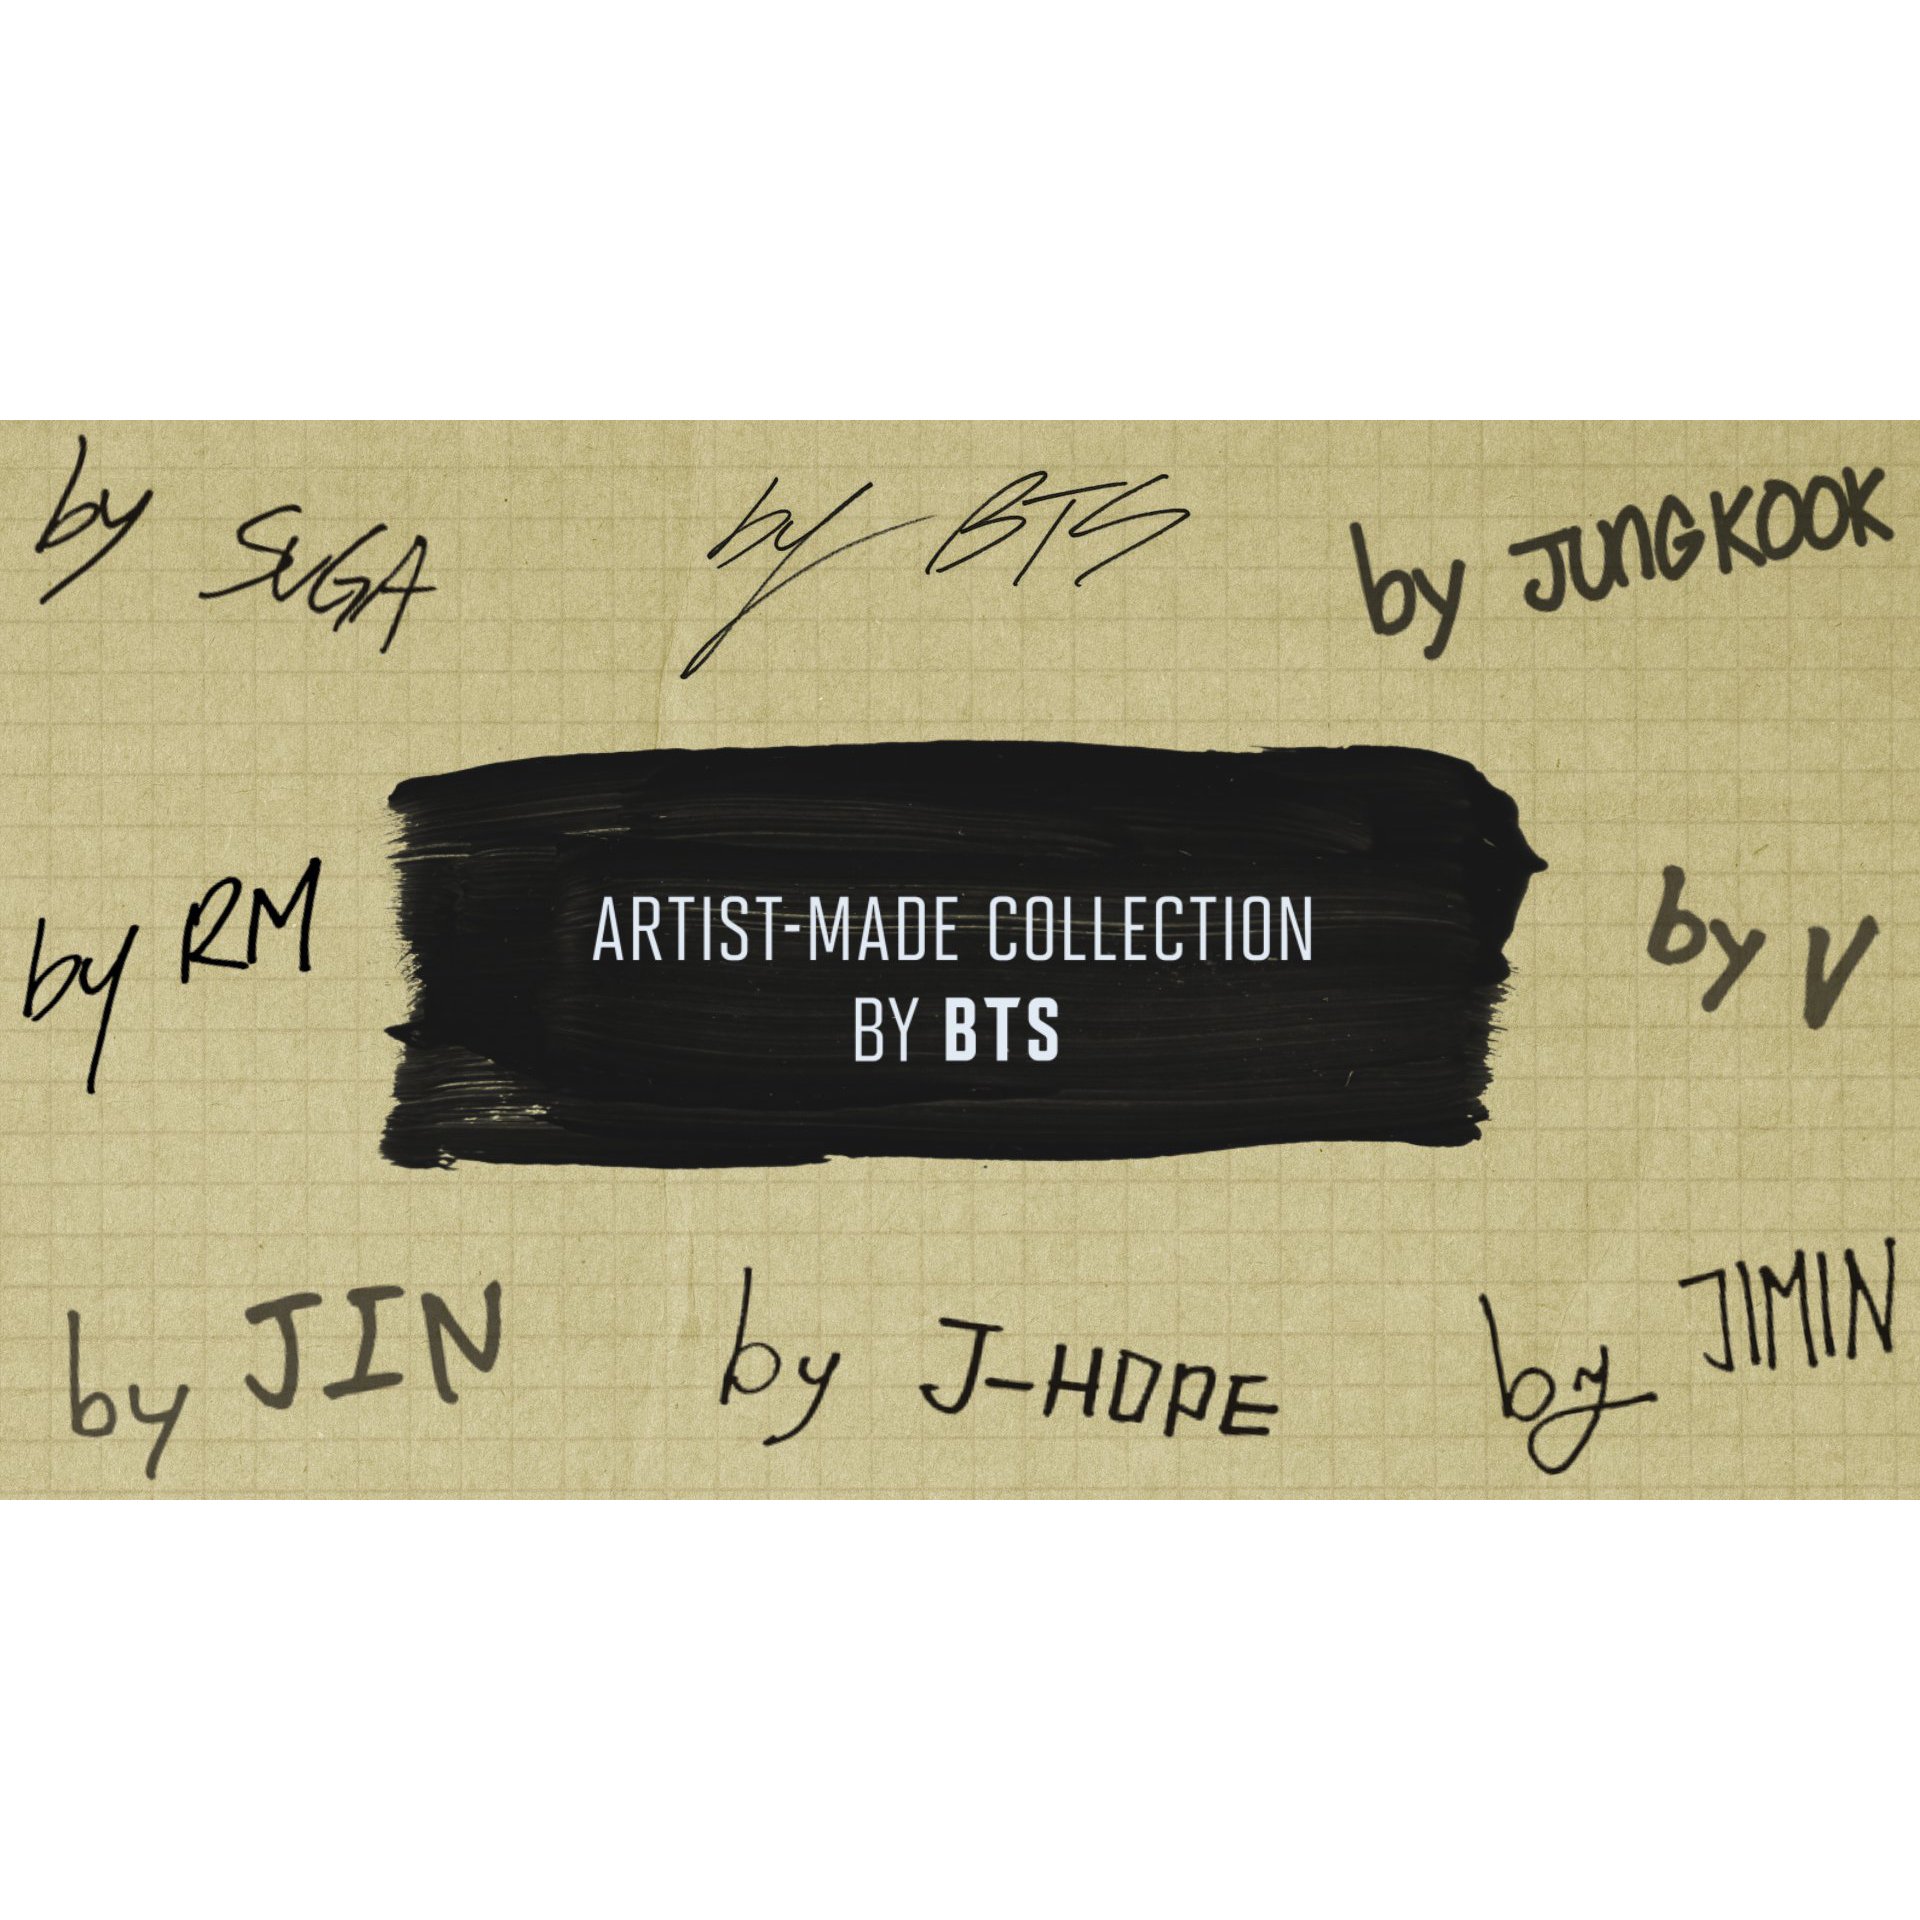 MERCH] ARTIST-MADE Collection by BTS — US BTS ARMY